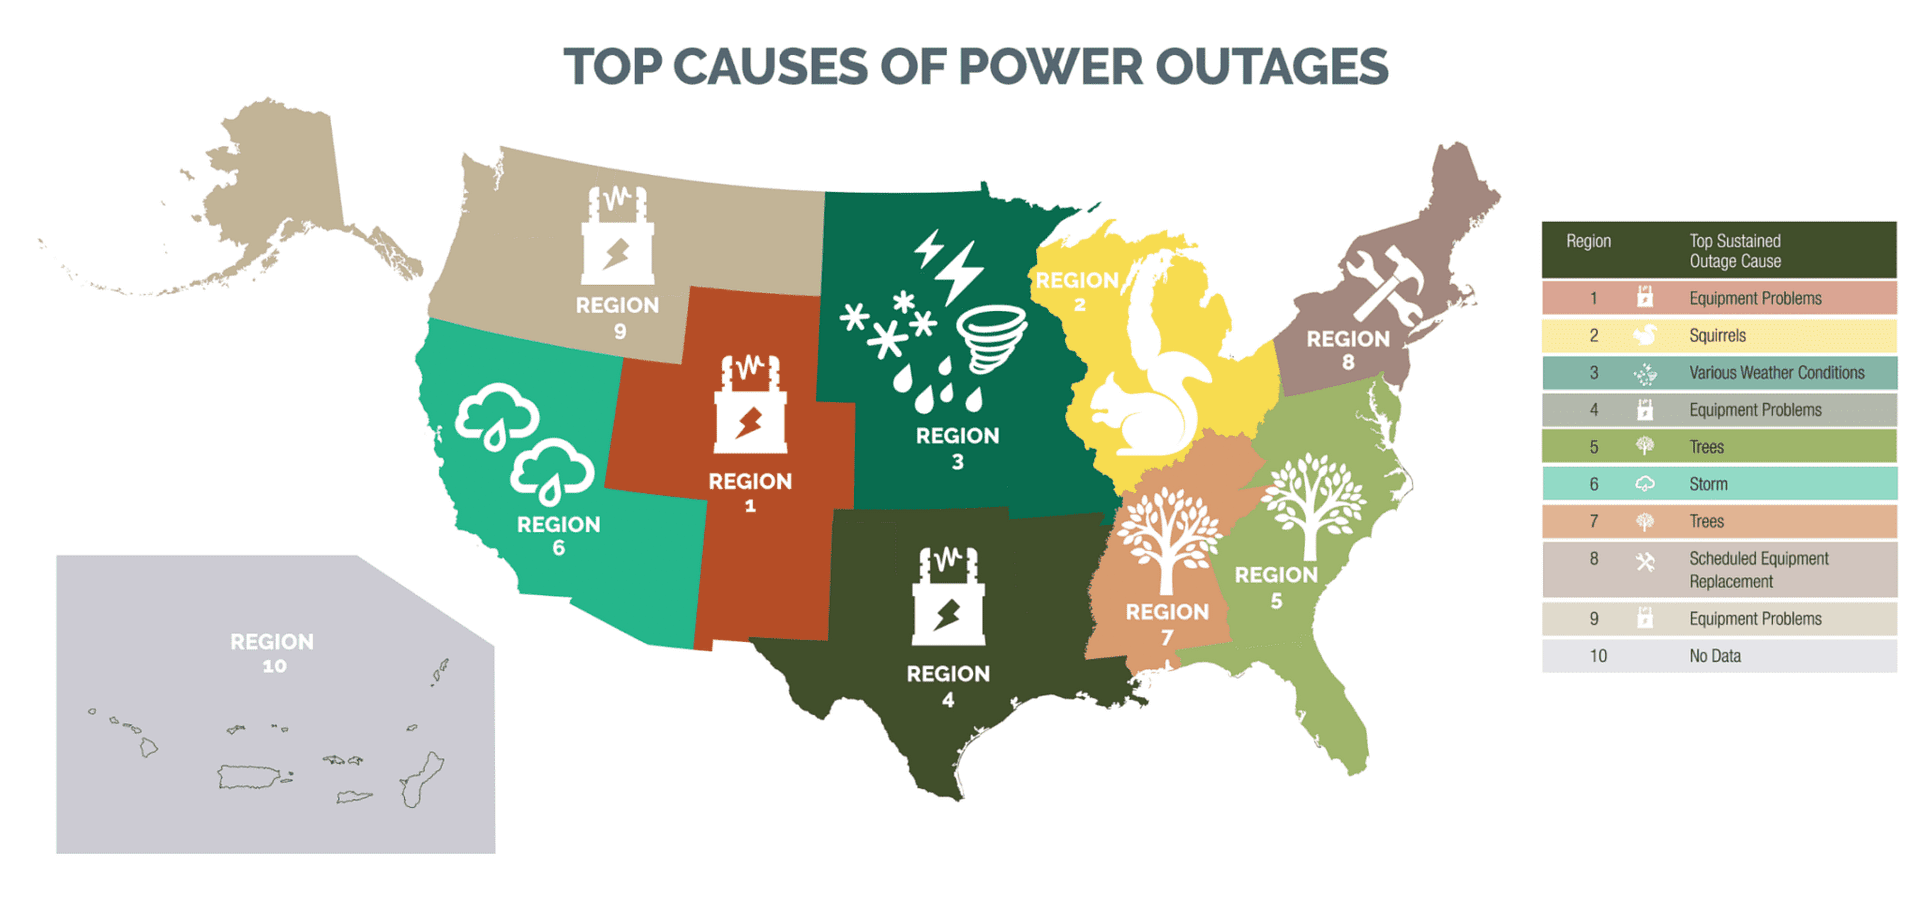 Top Causes of Power Outages